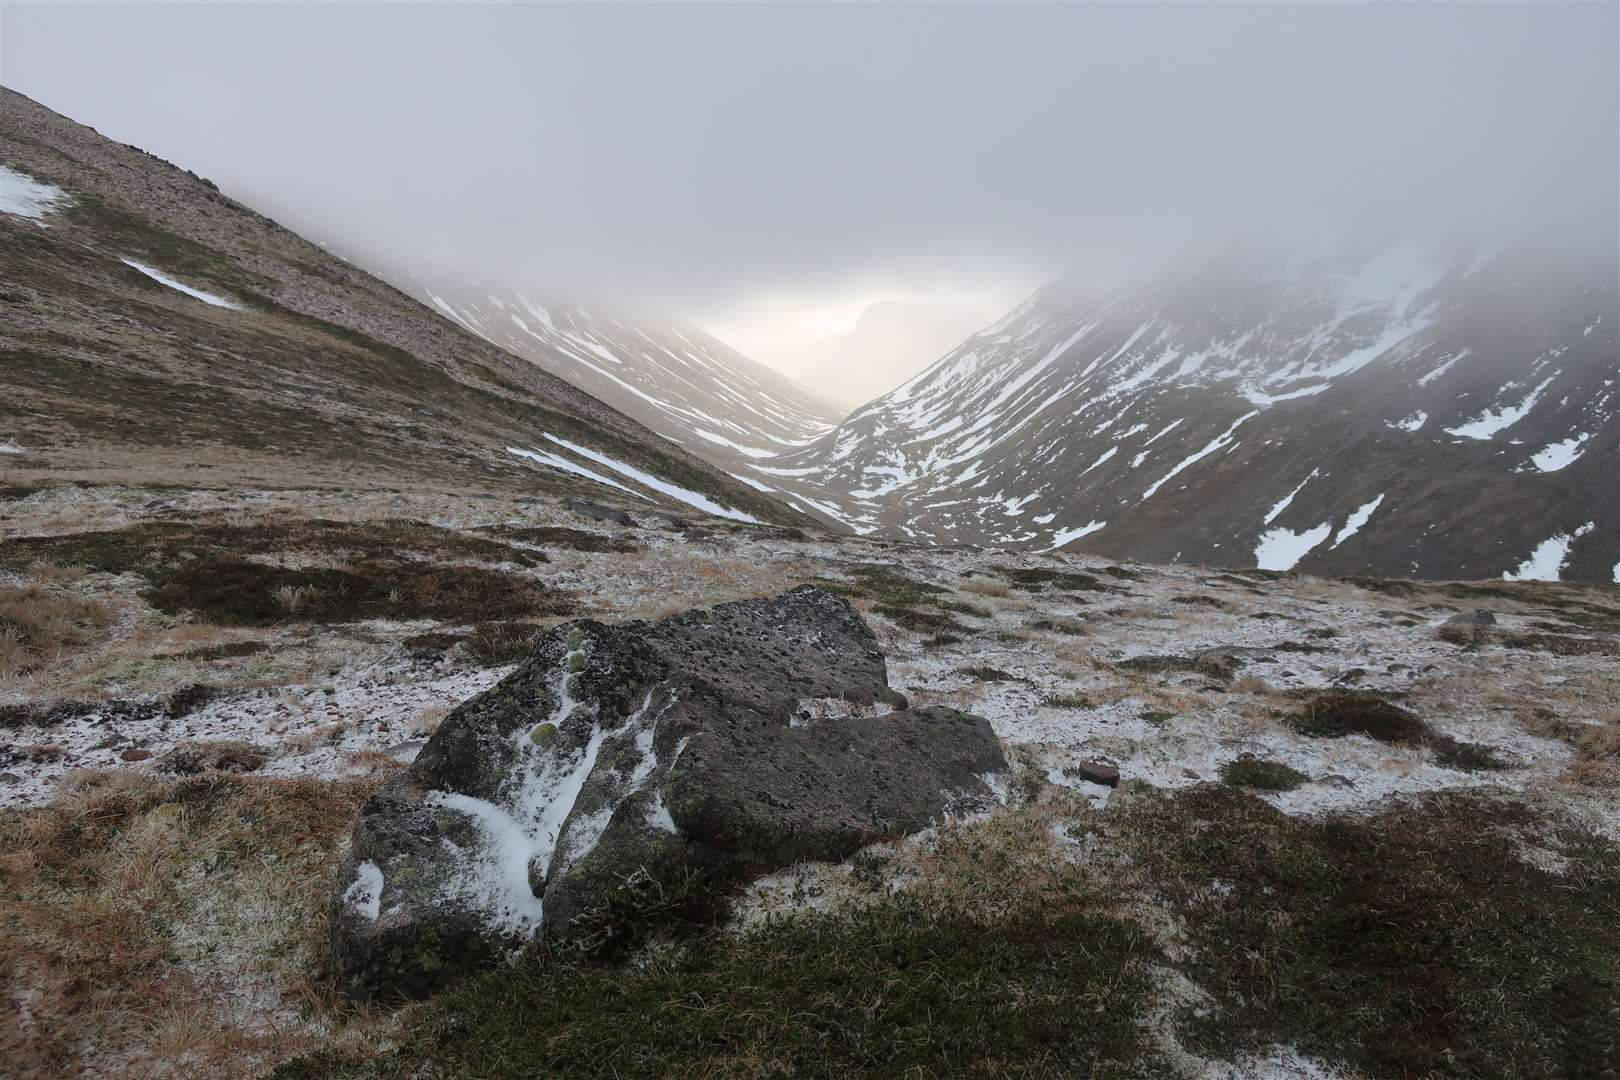 Looking south down the Lairig Ghru towards the Devil's Point from the flat bealach.